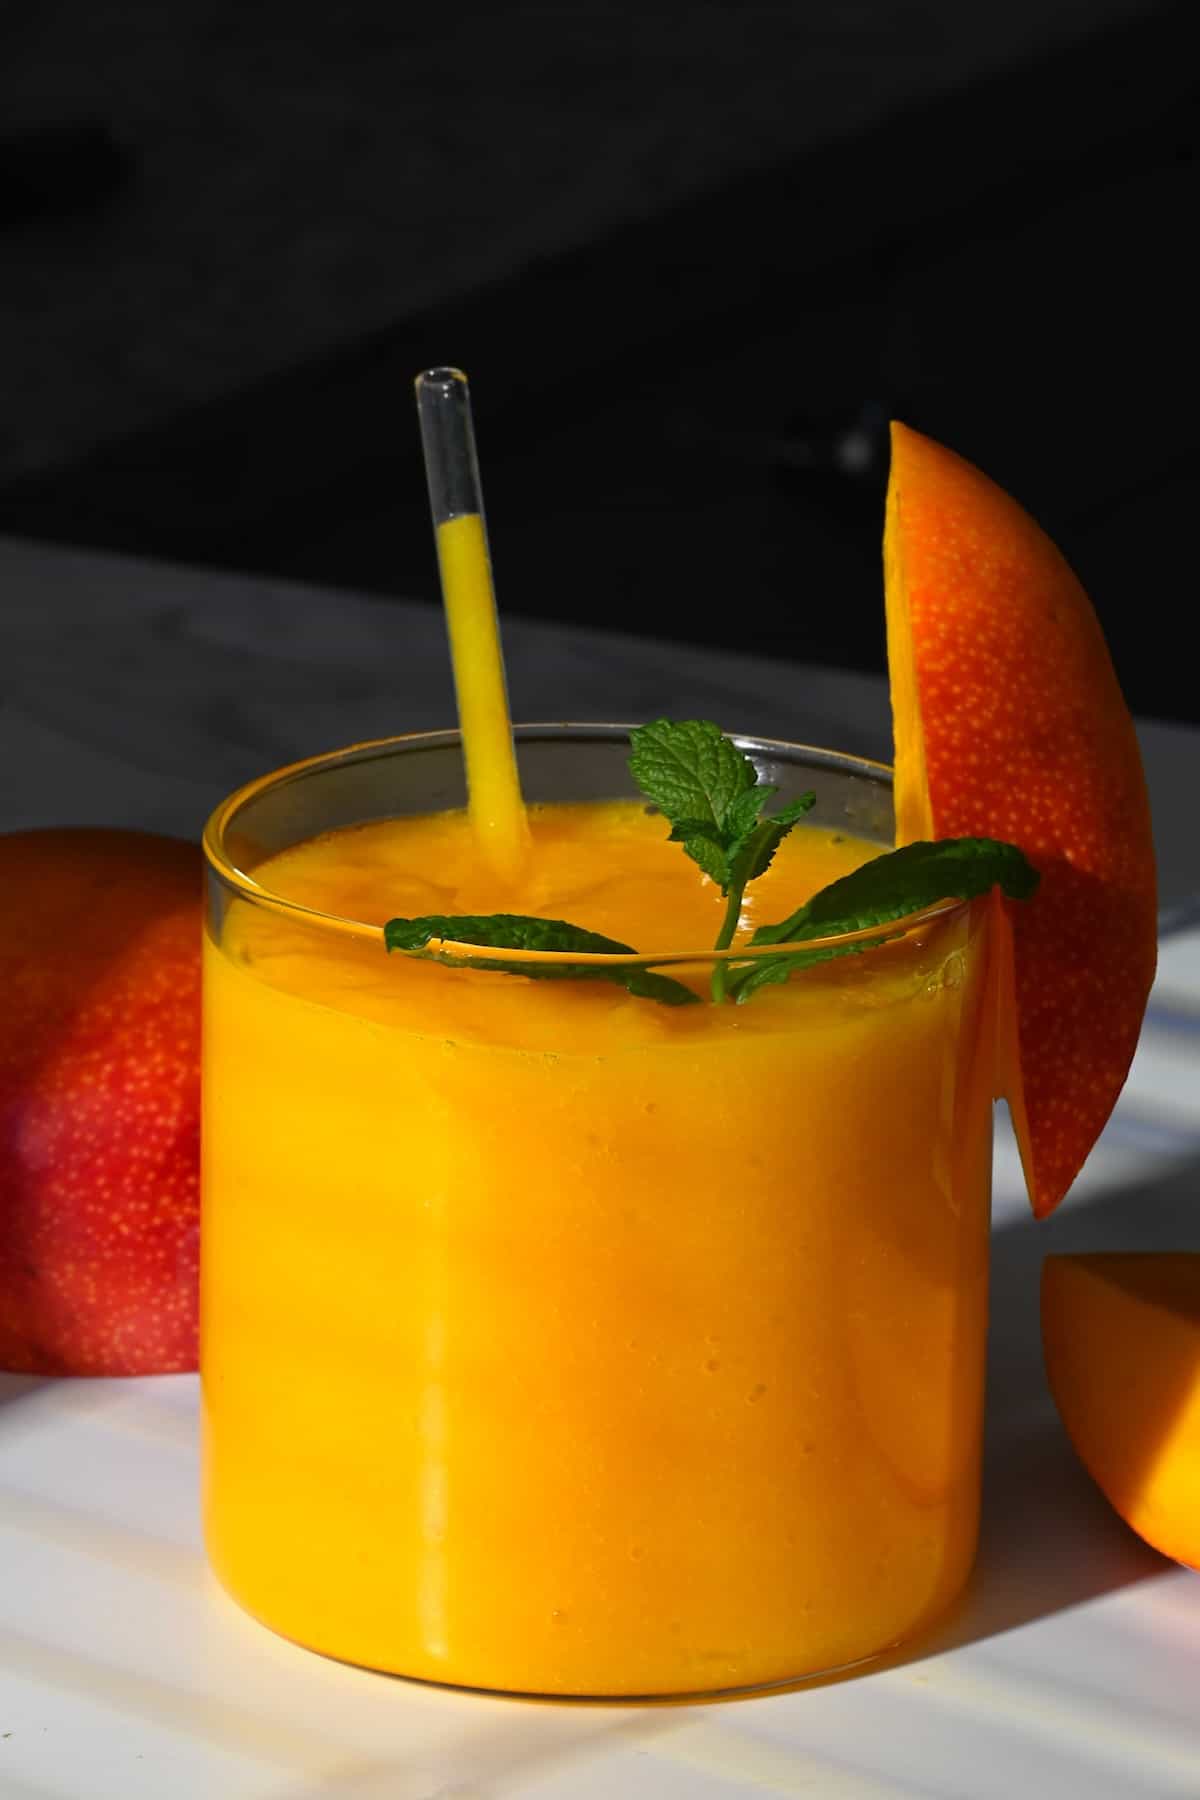 Tips To Keep Your Fruit Juices Fresh